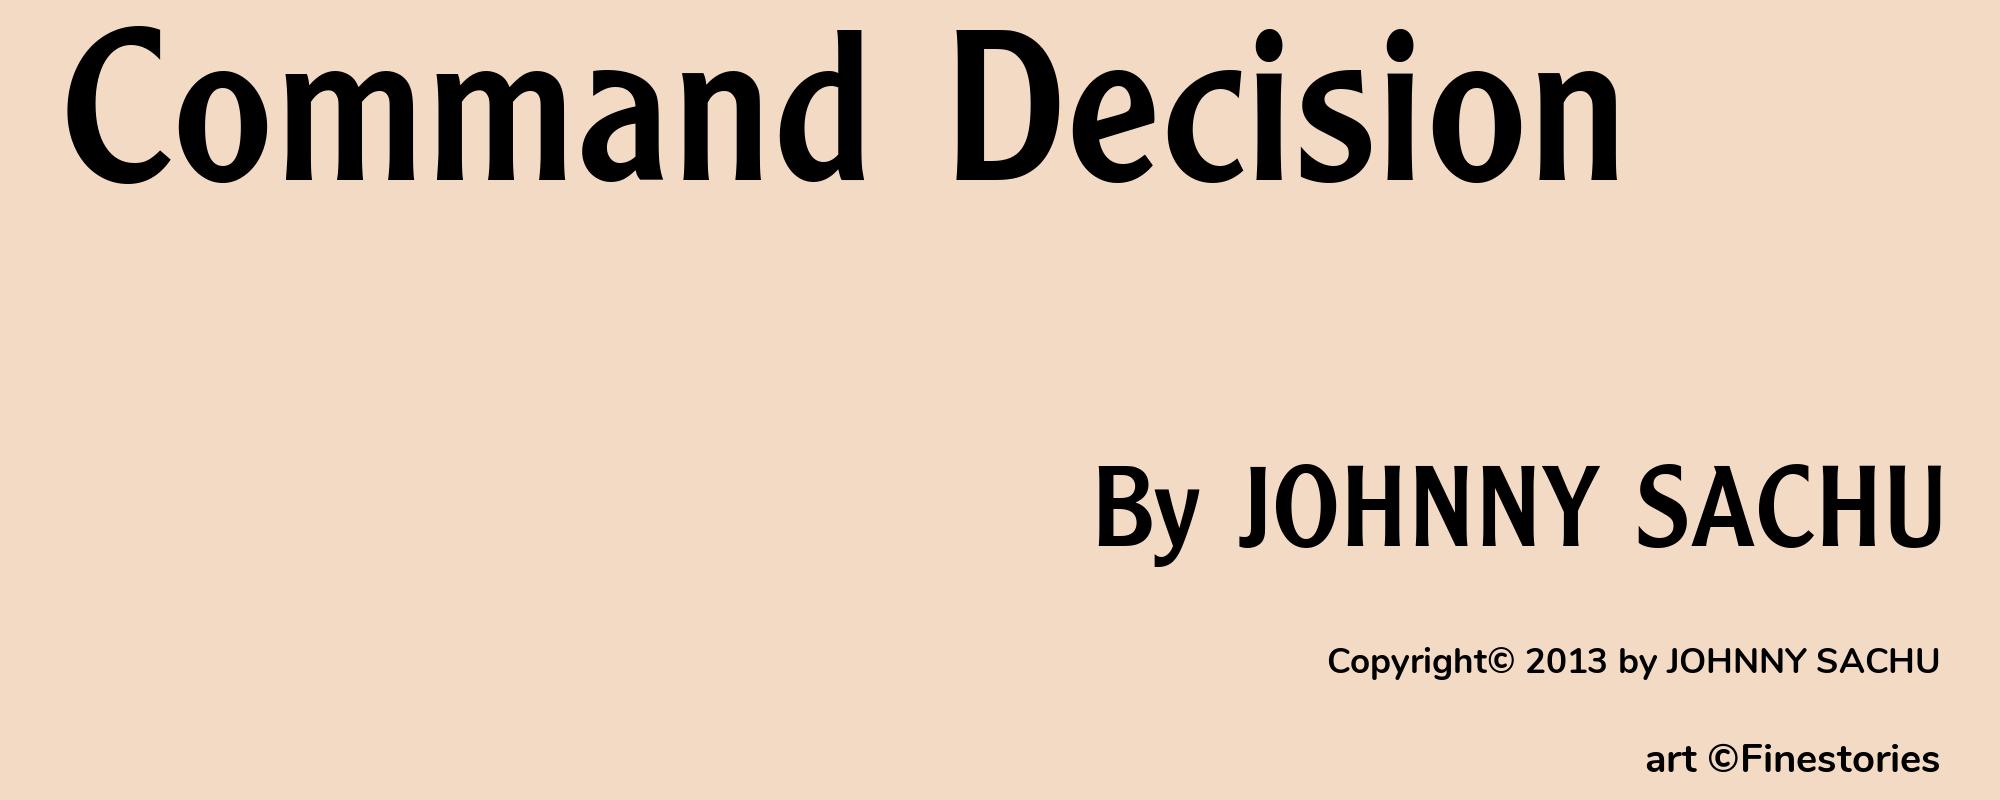 Command Decision - Cover